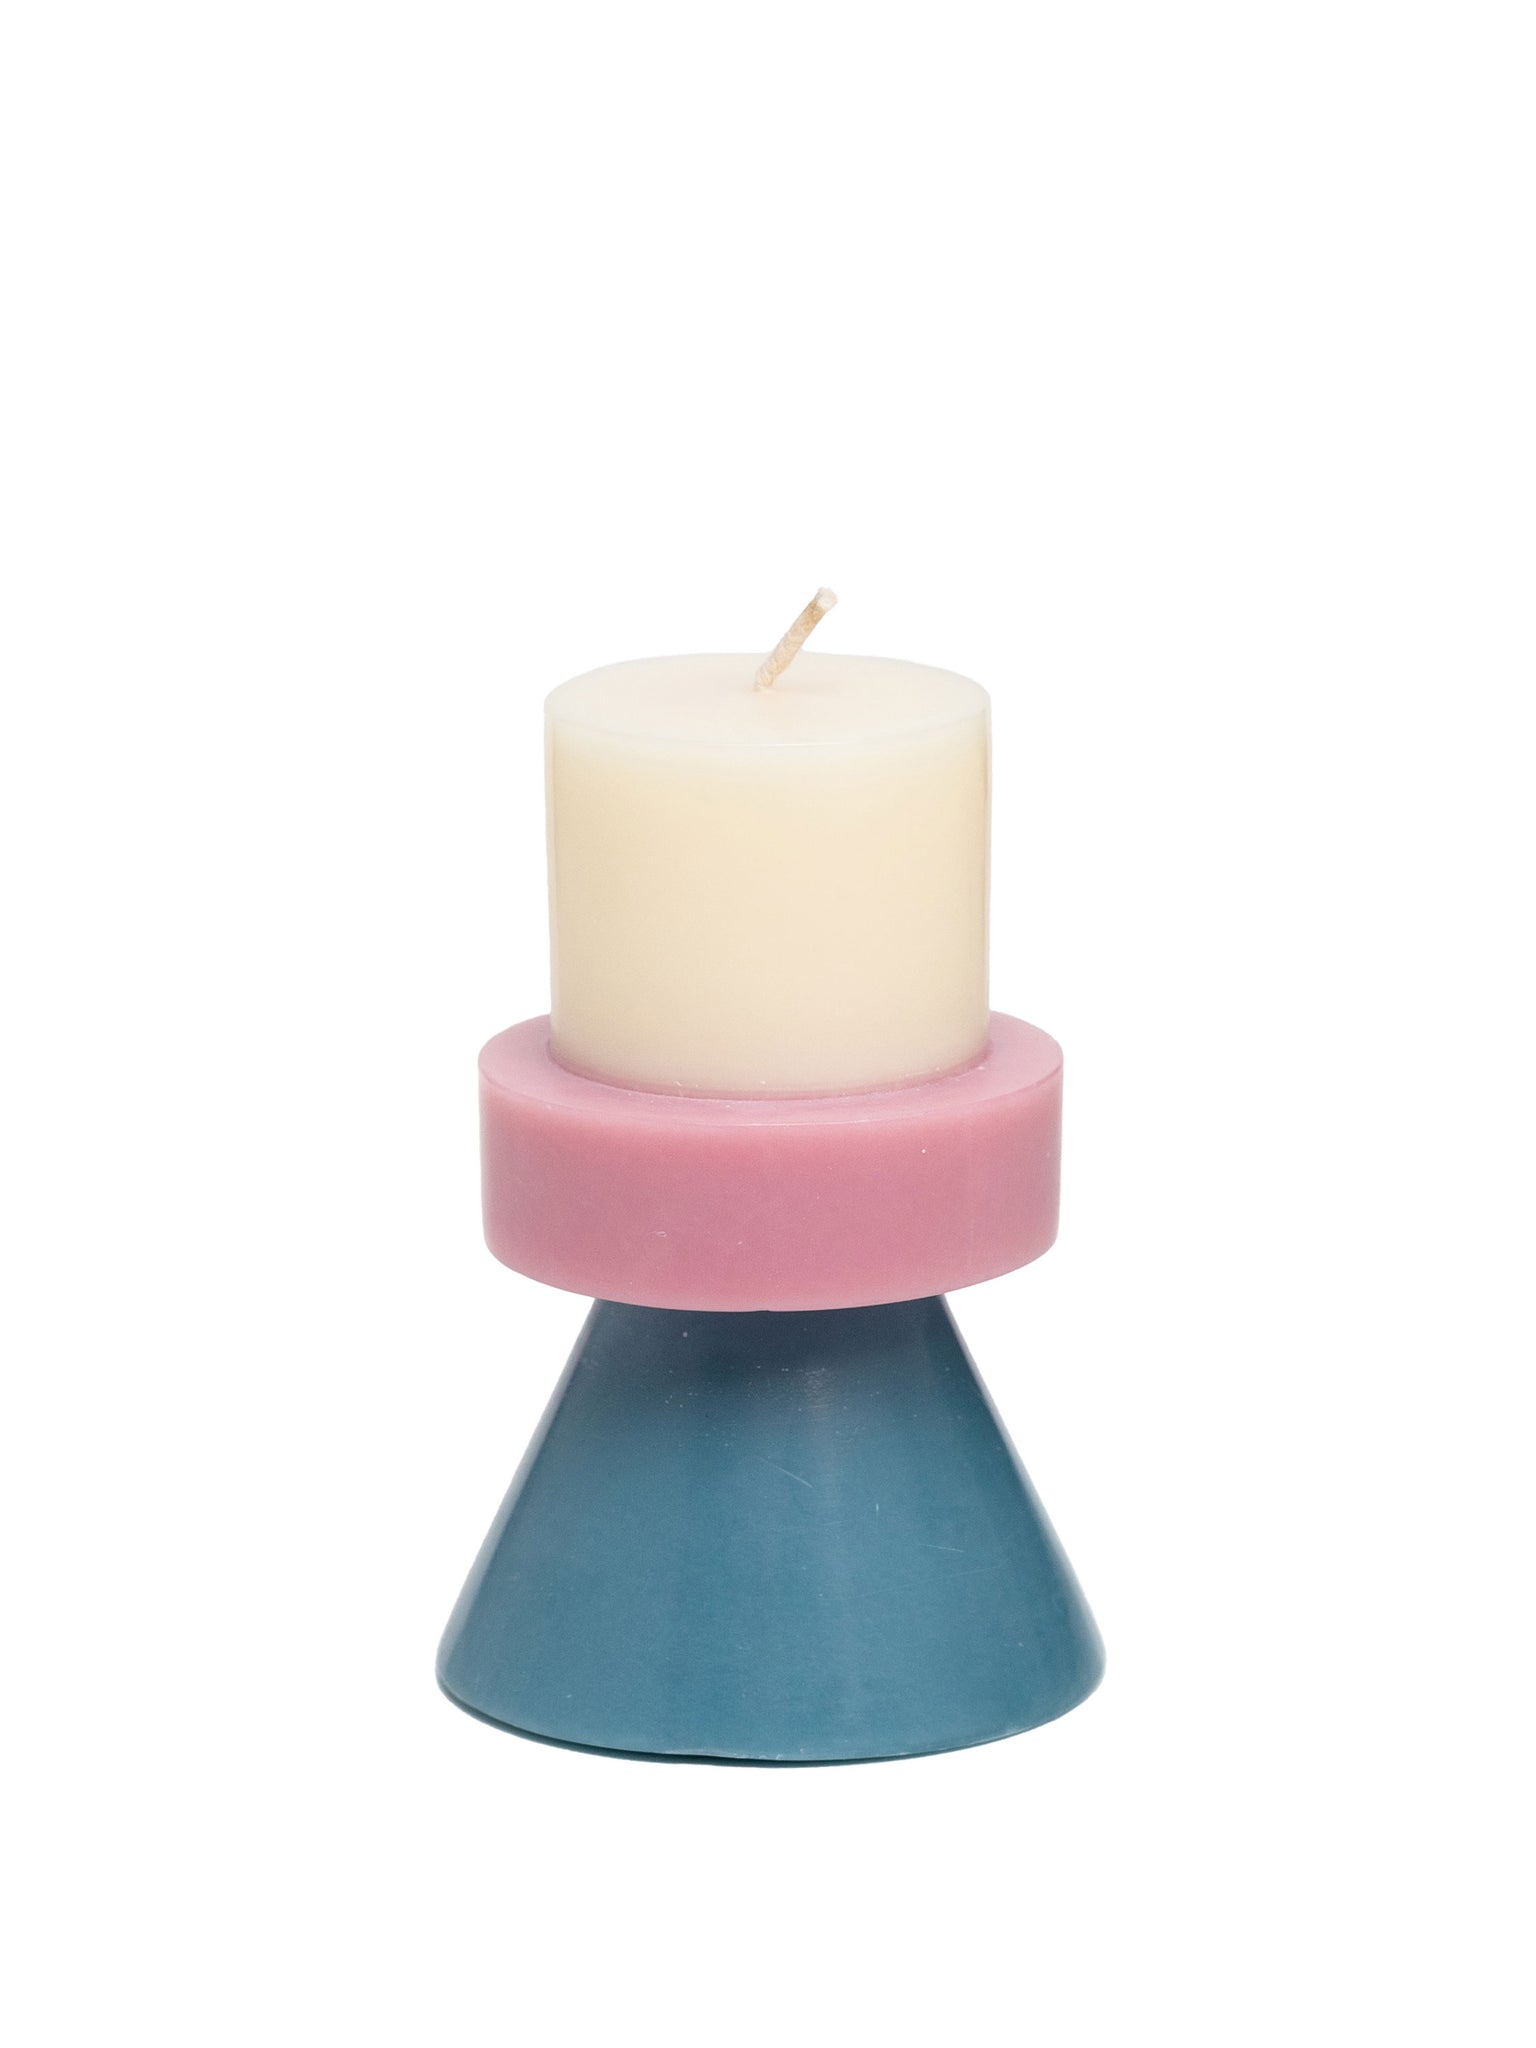 Stack Candle mini by Yod and co in white, purple and blue